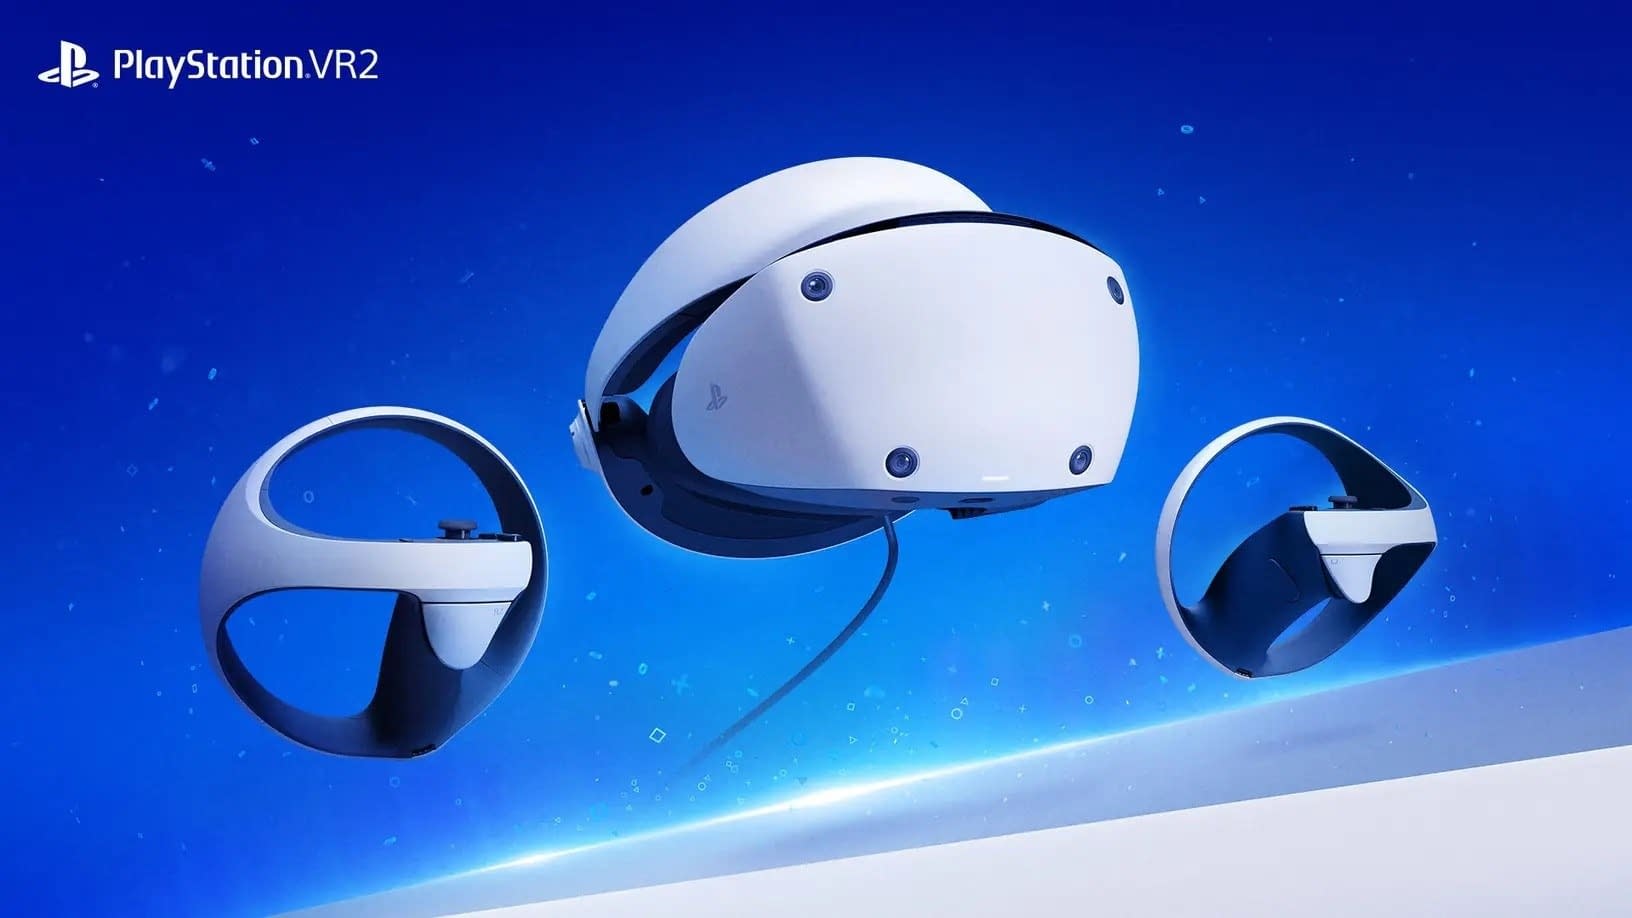 Playstation VR2 first impression and header performance